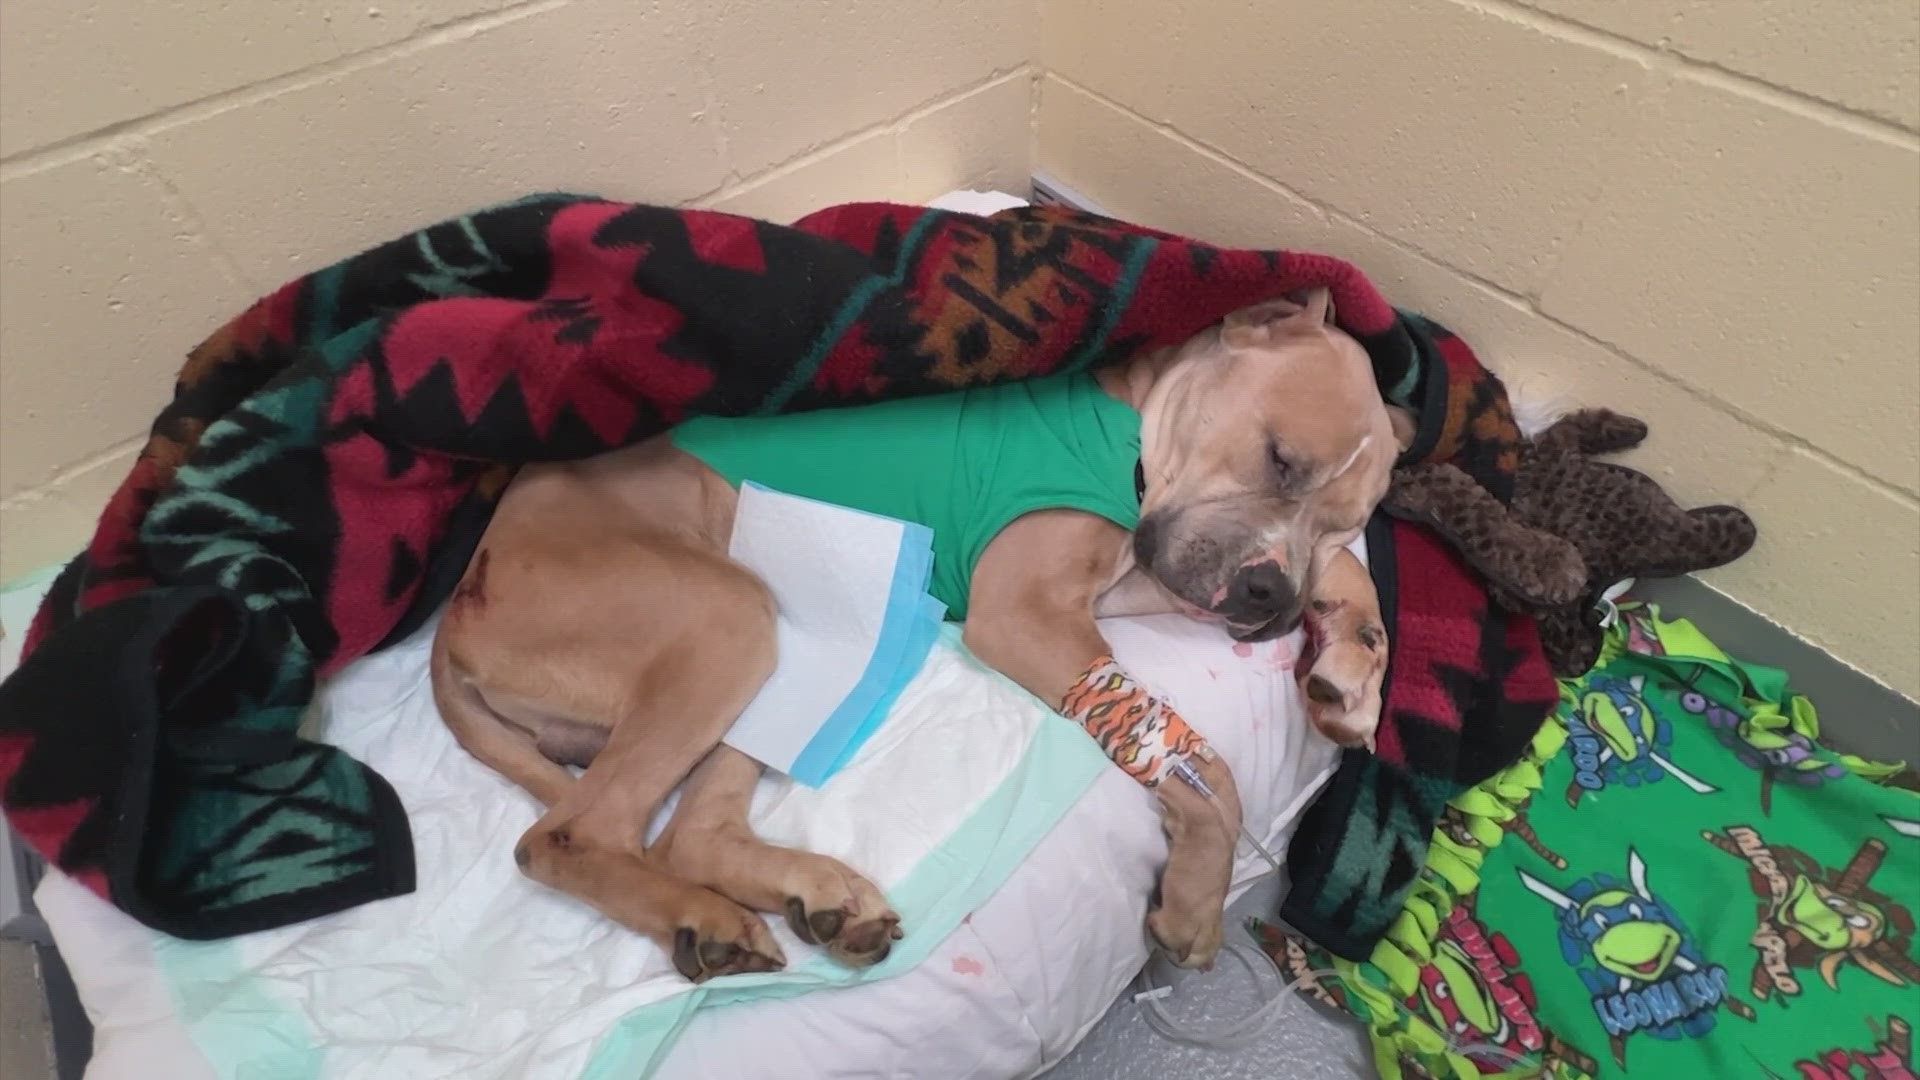 A community member found Thomas on a front porch, hypothermic and emaciated. The dog is now in the care of the humane society.